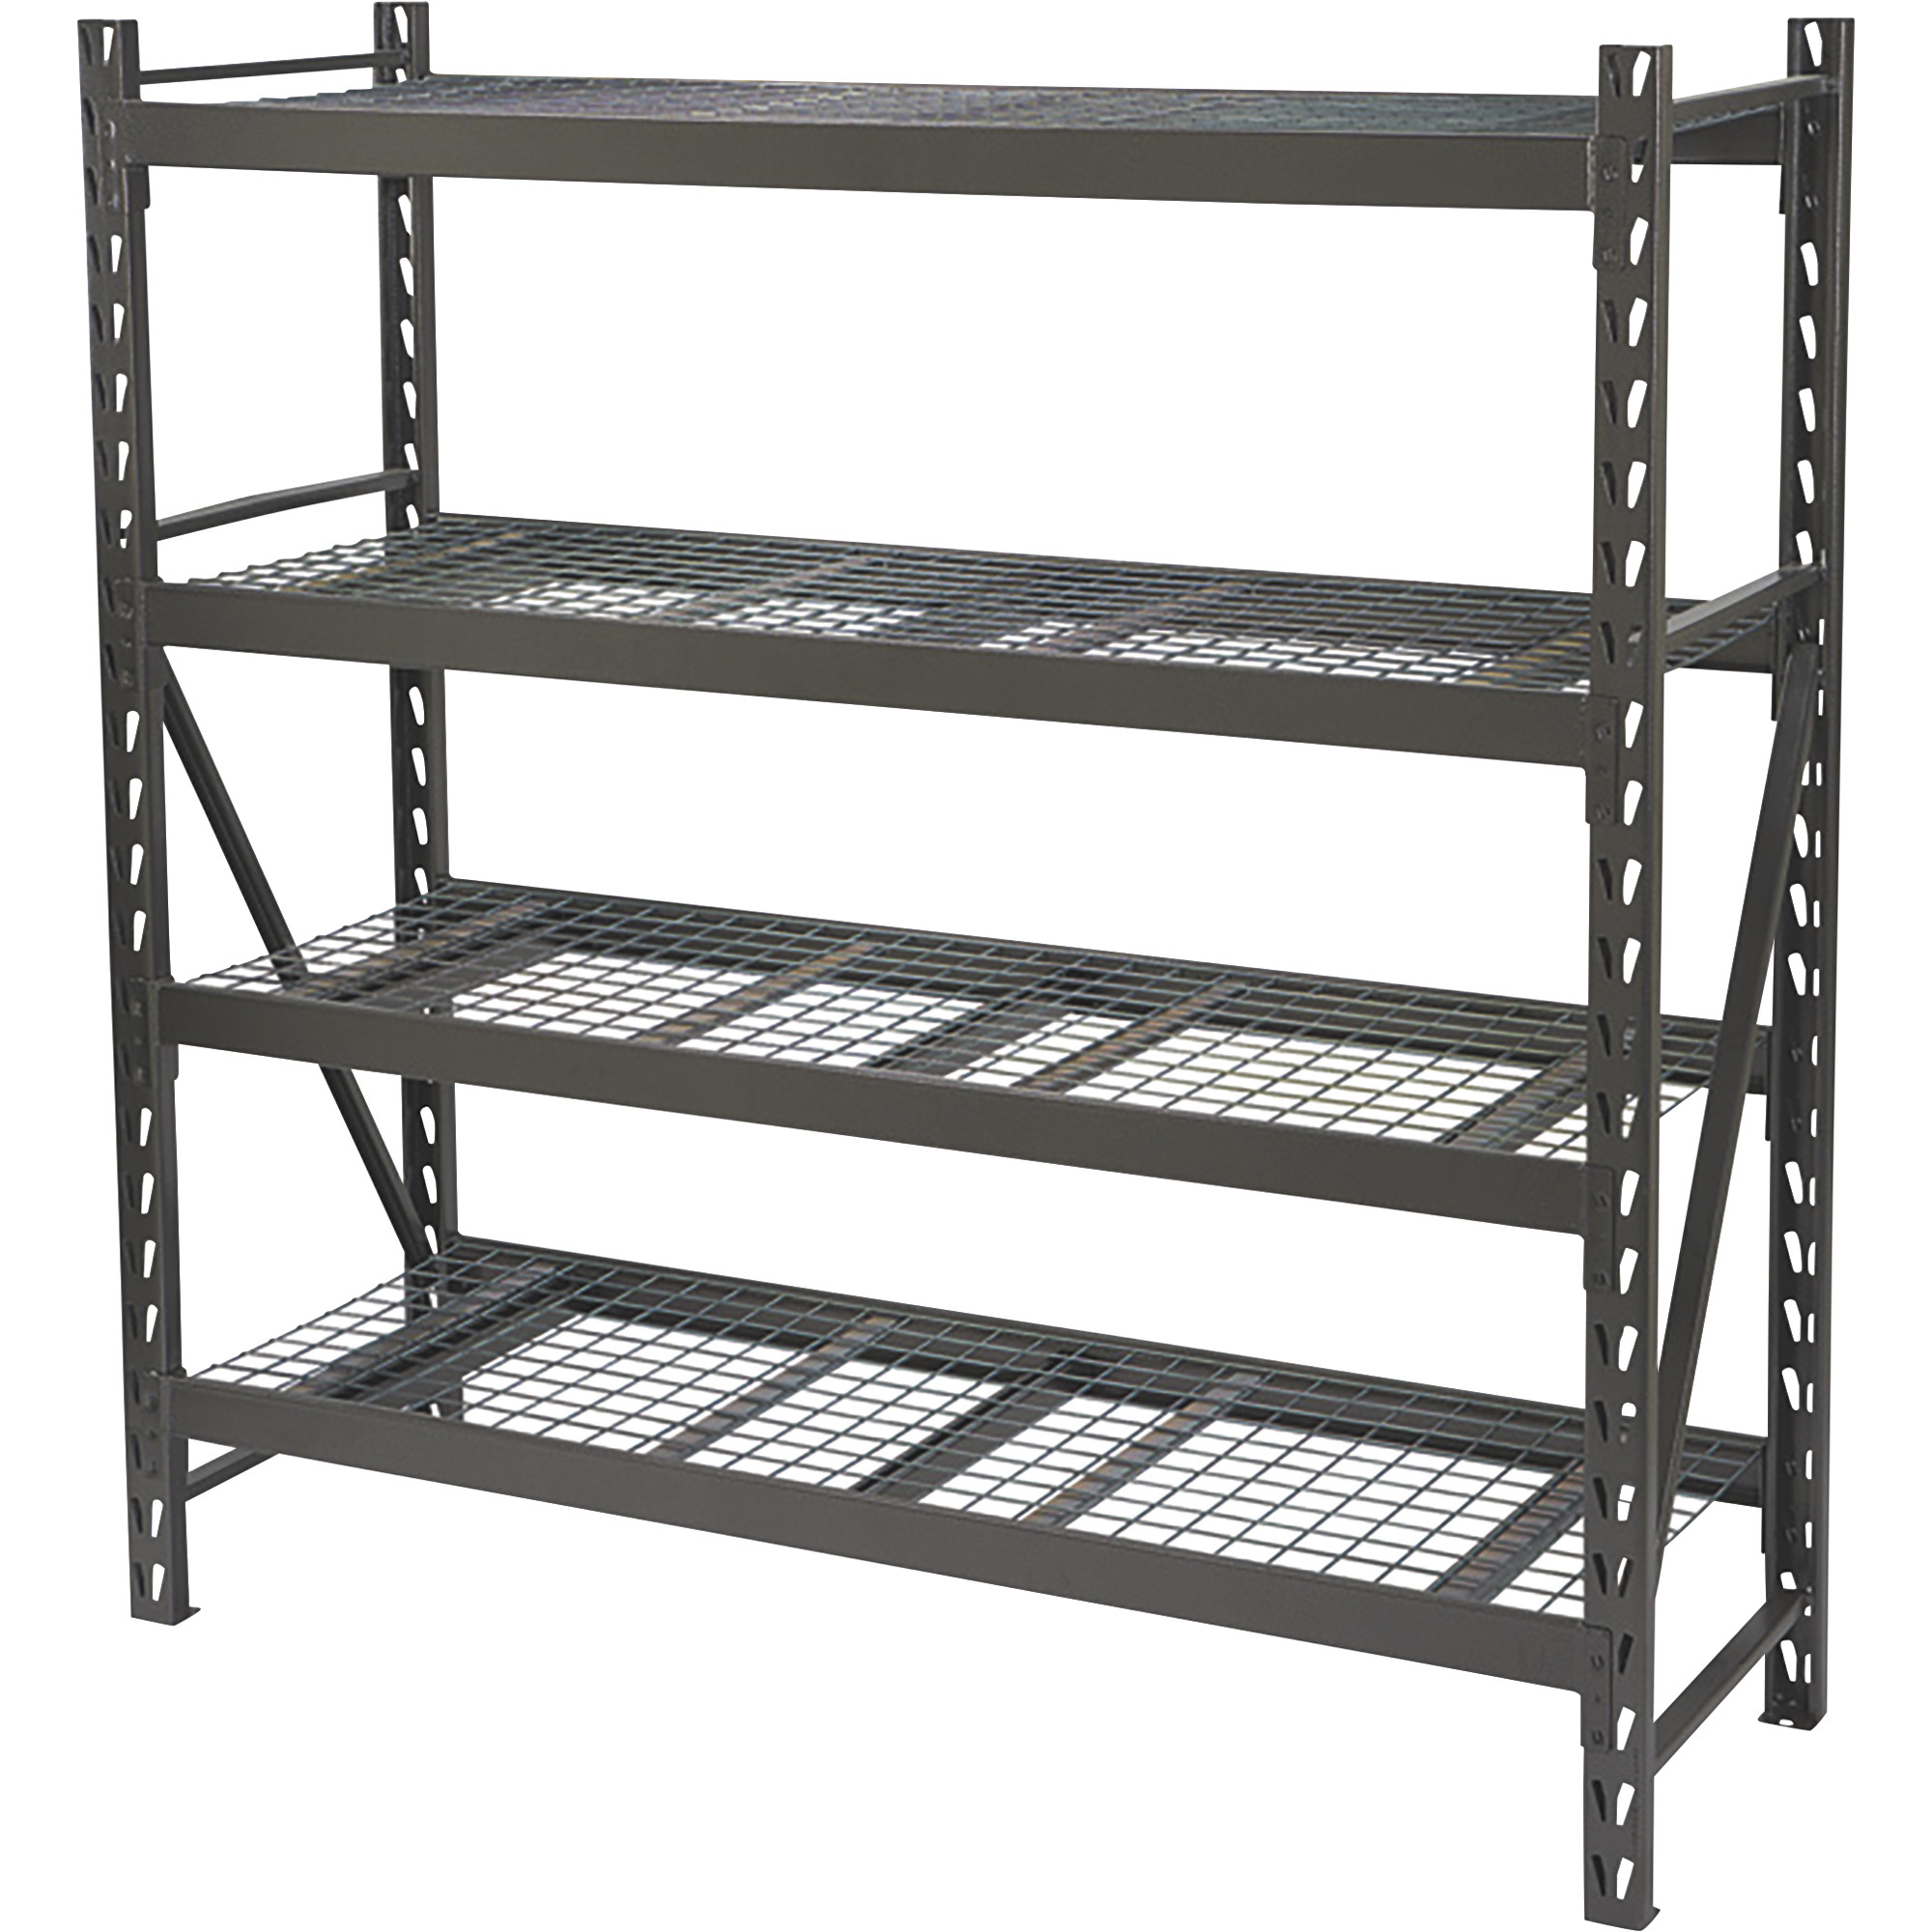 Ironton 4-Tier Industrial Steel Shelving Unit, 8,000-Lb. Load Capacity, 77Inch W x 24Inch D x 72Inch H